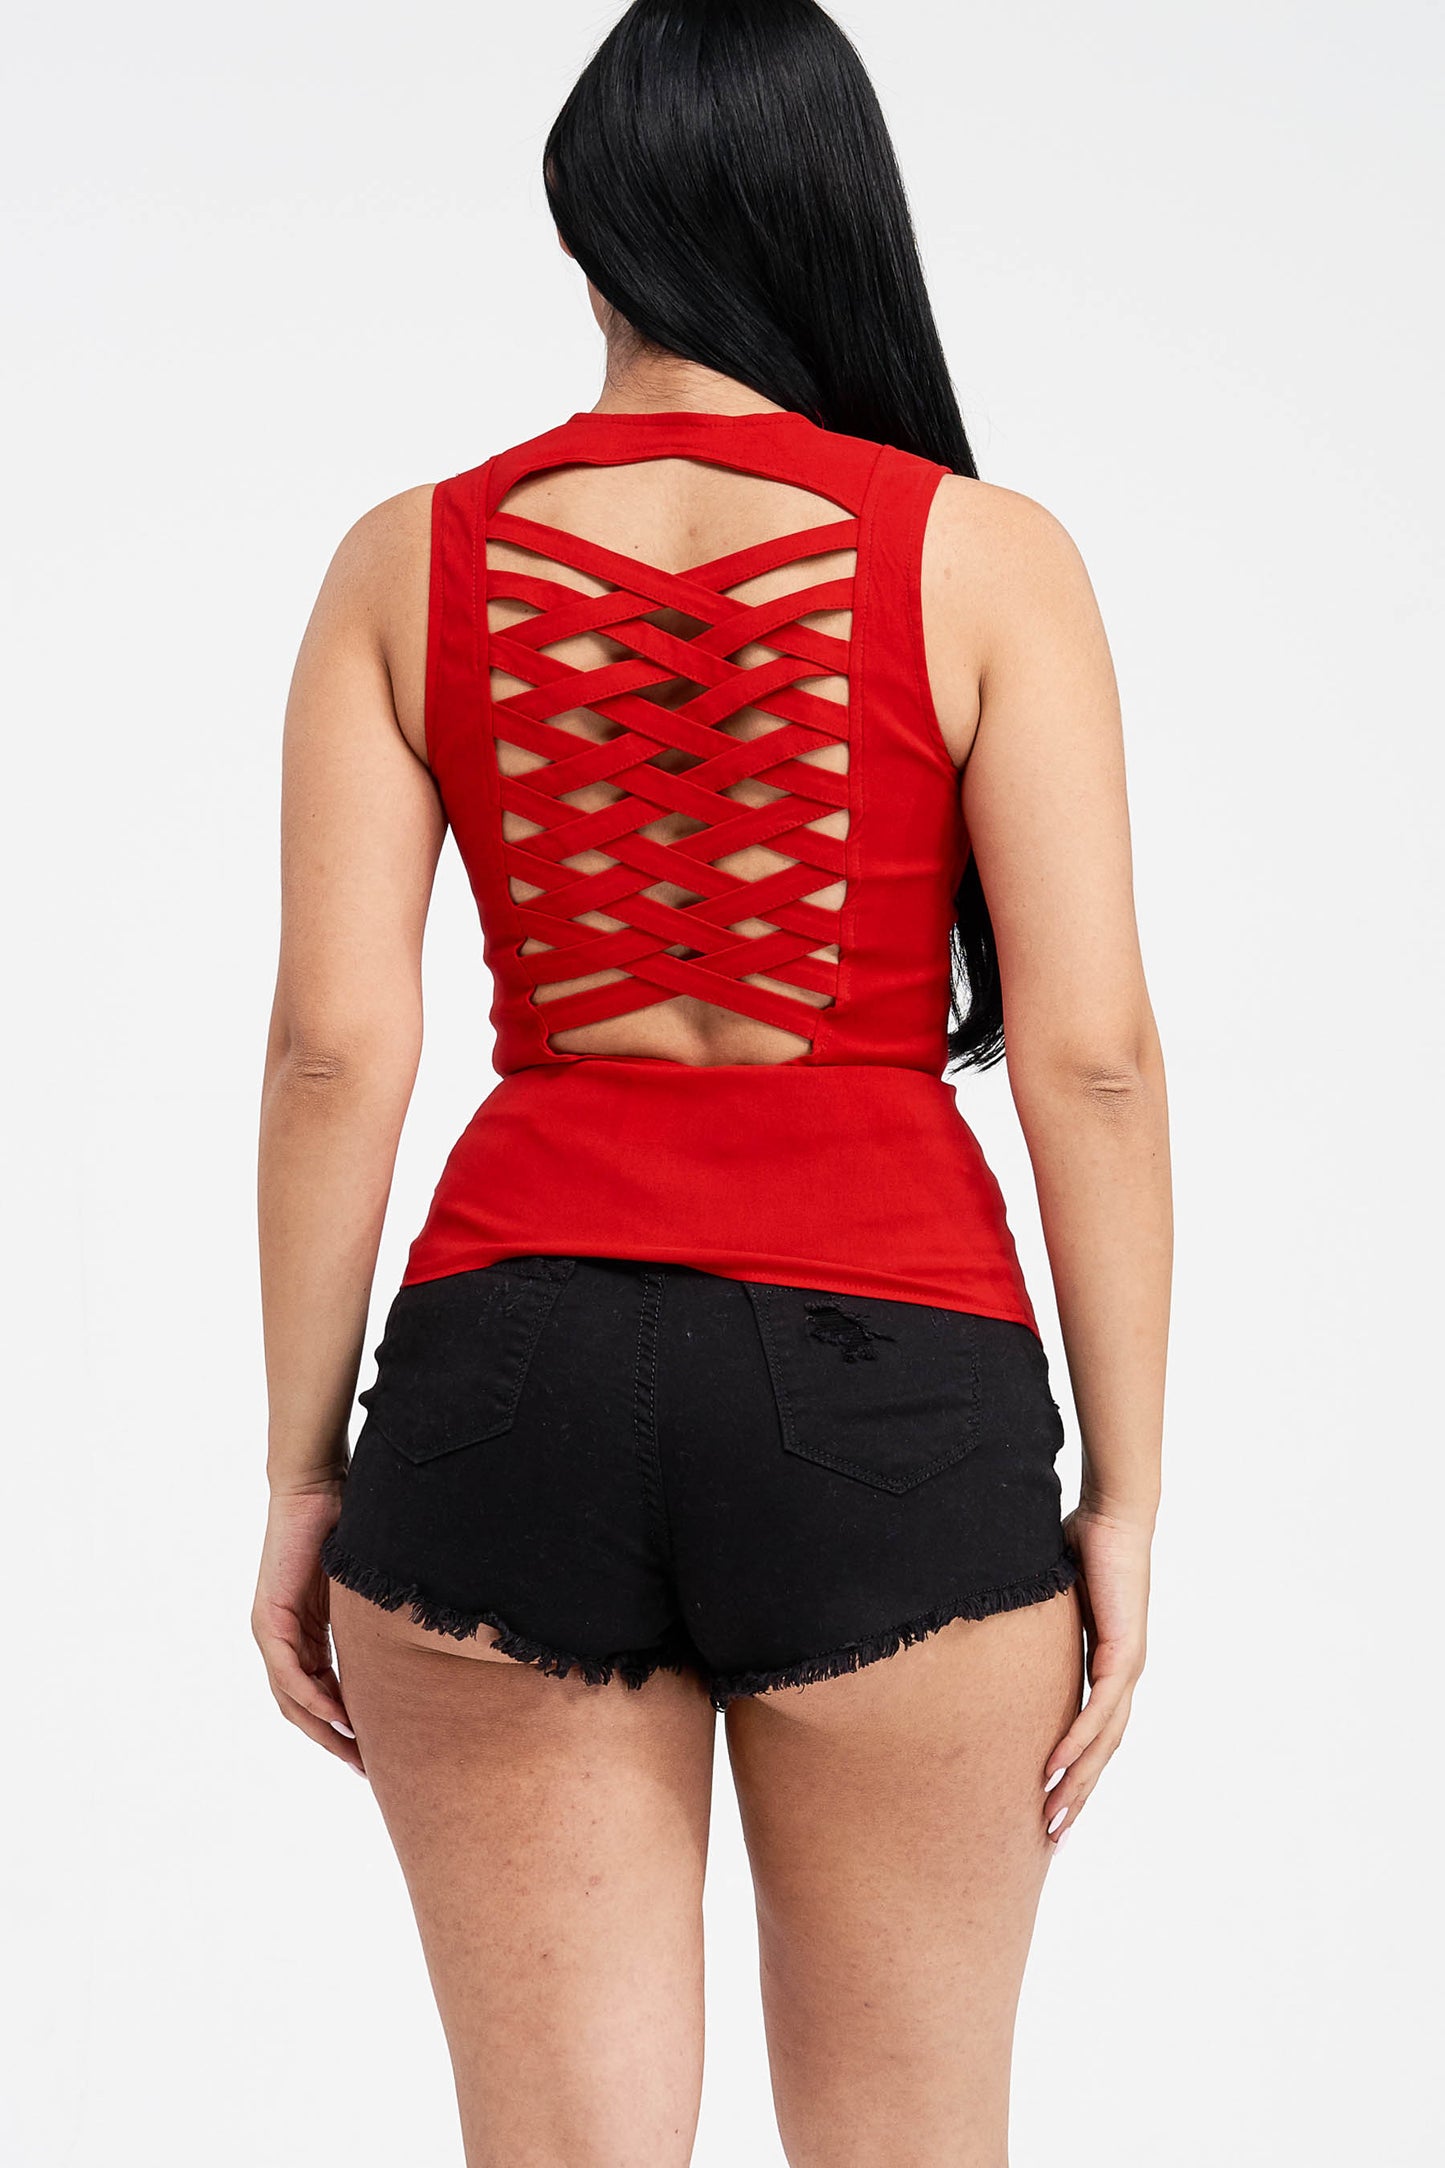 Criss Cross Back Vest Red - Unleashed Jewelry